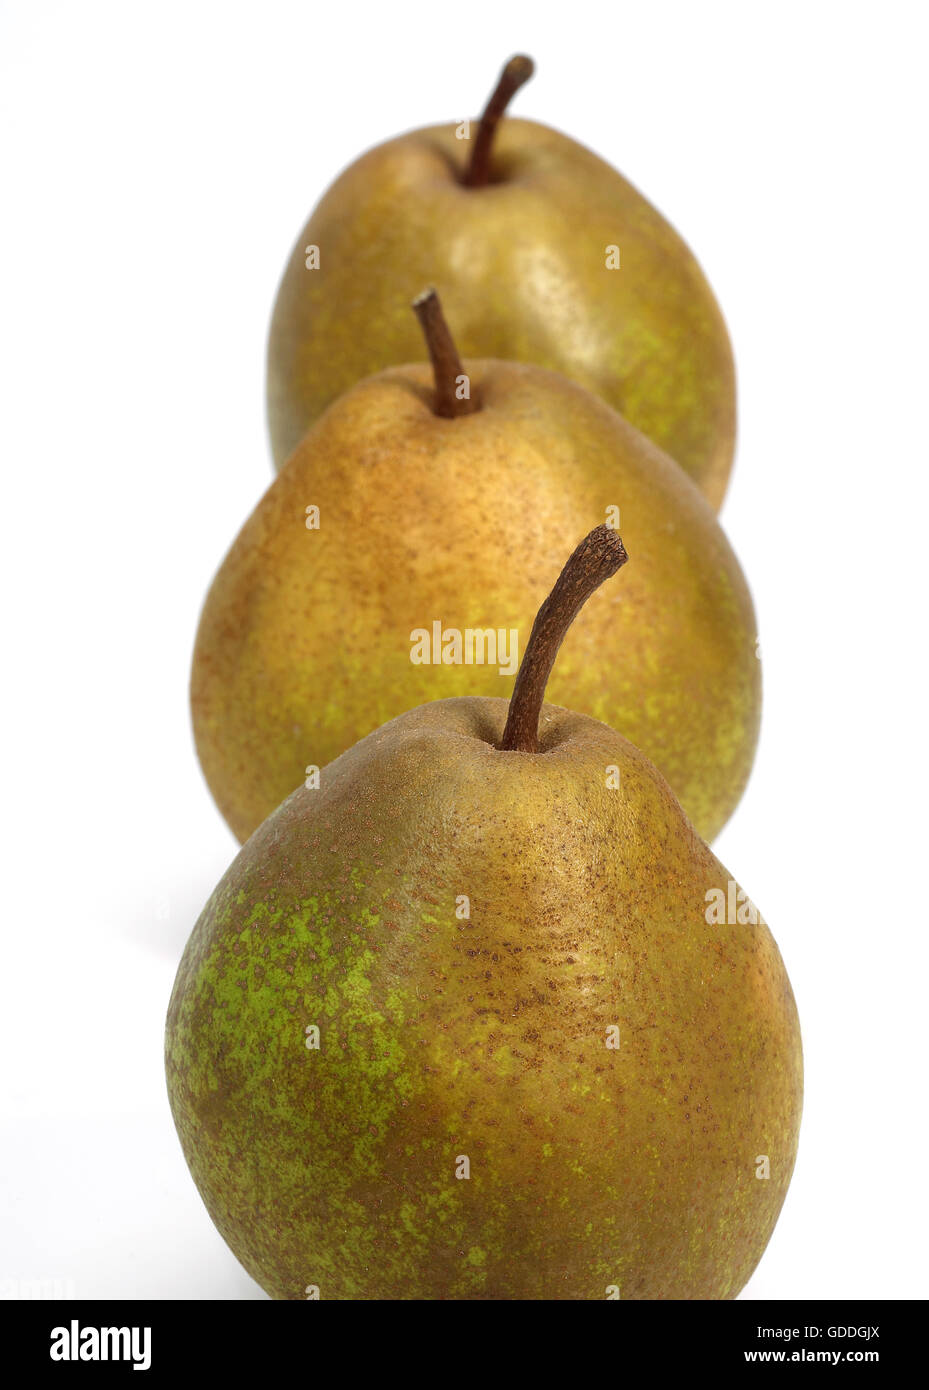 Beurre Hardy Pear, pyrus communis, Fruit against White Background Stock Photo